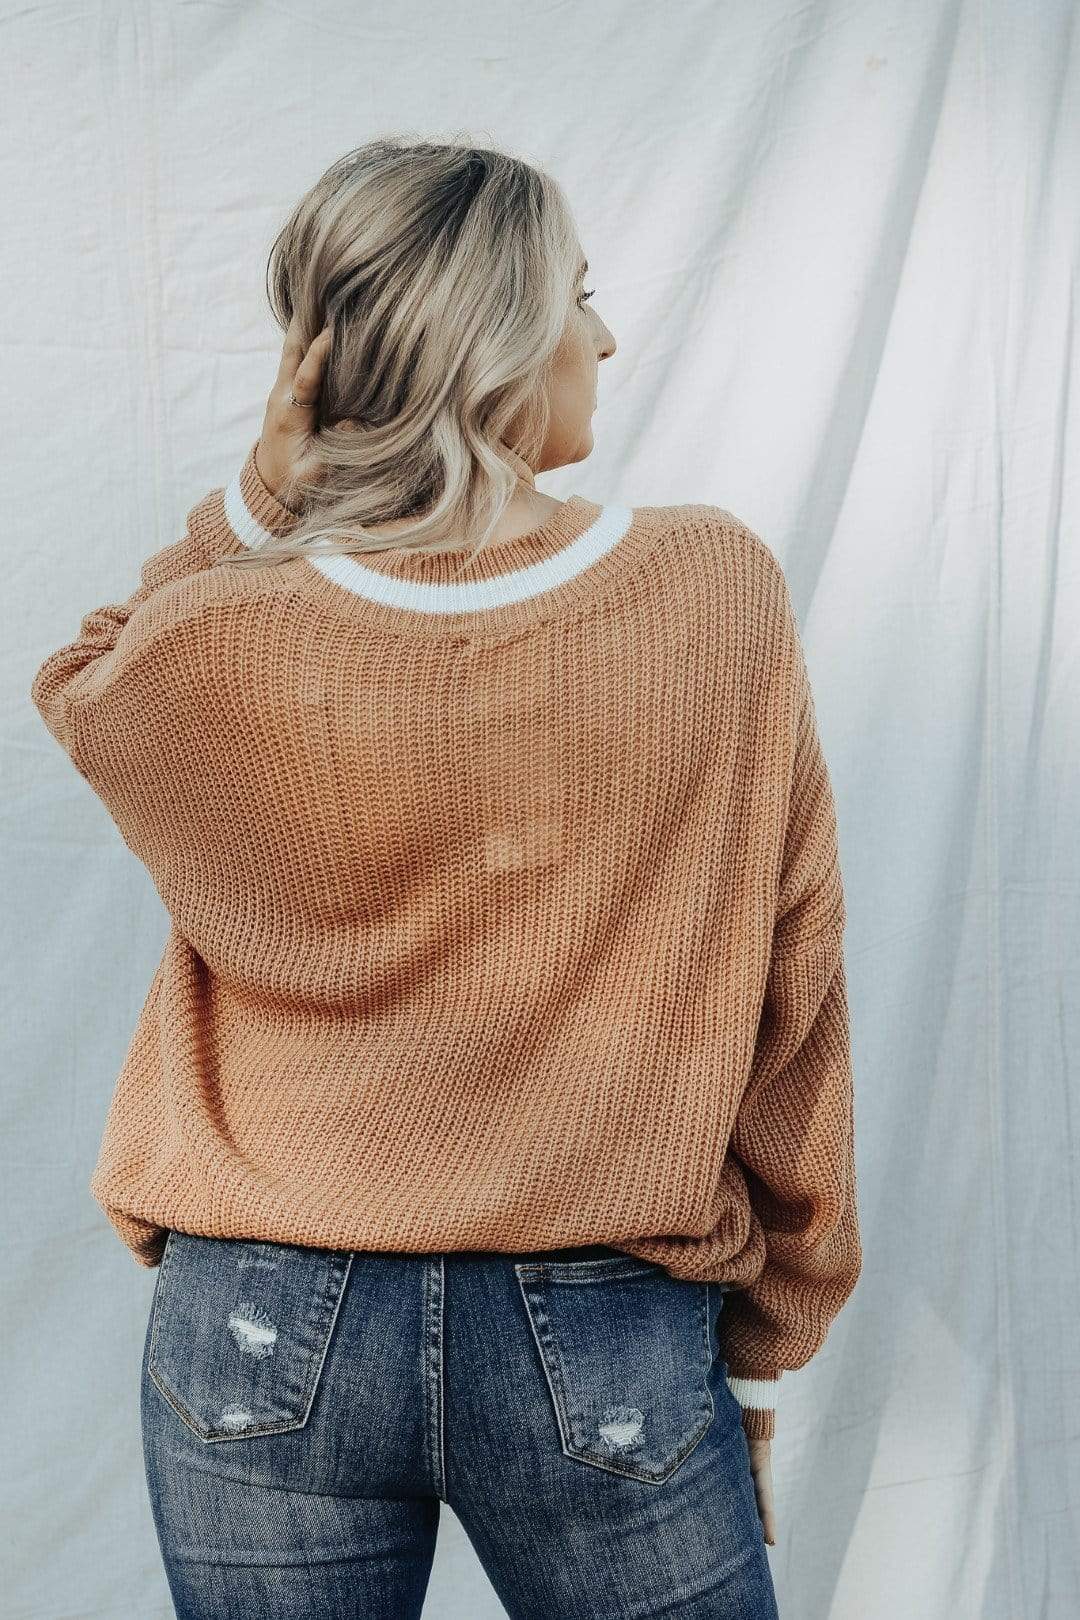 Let's Get Toasty Knit Sweater - Select Trends Boutique